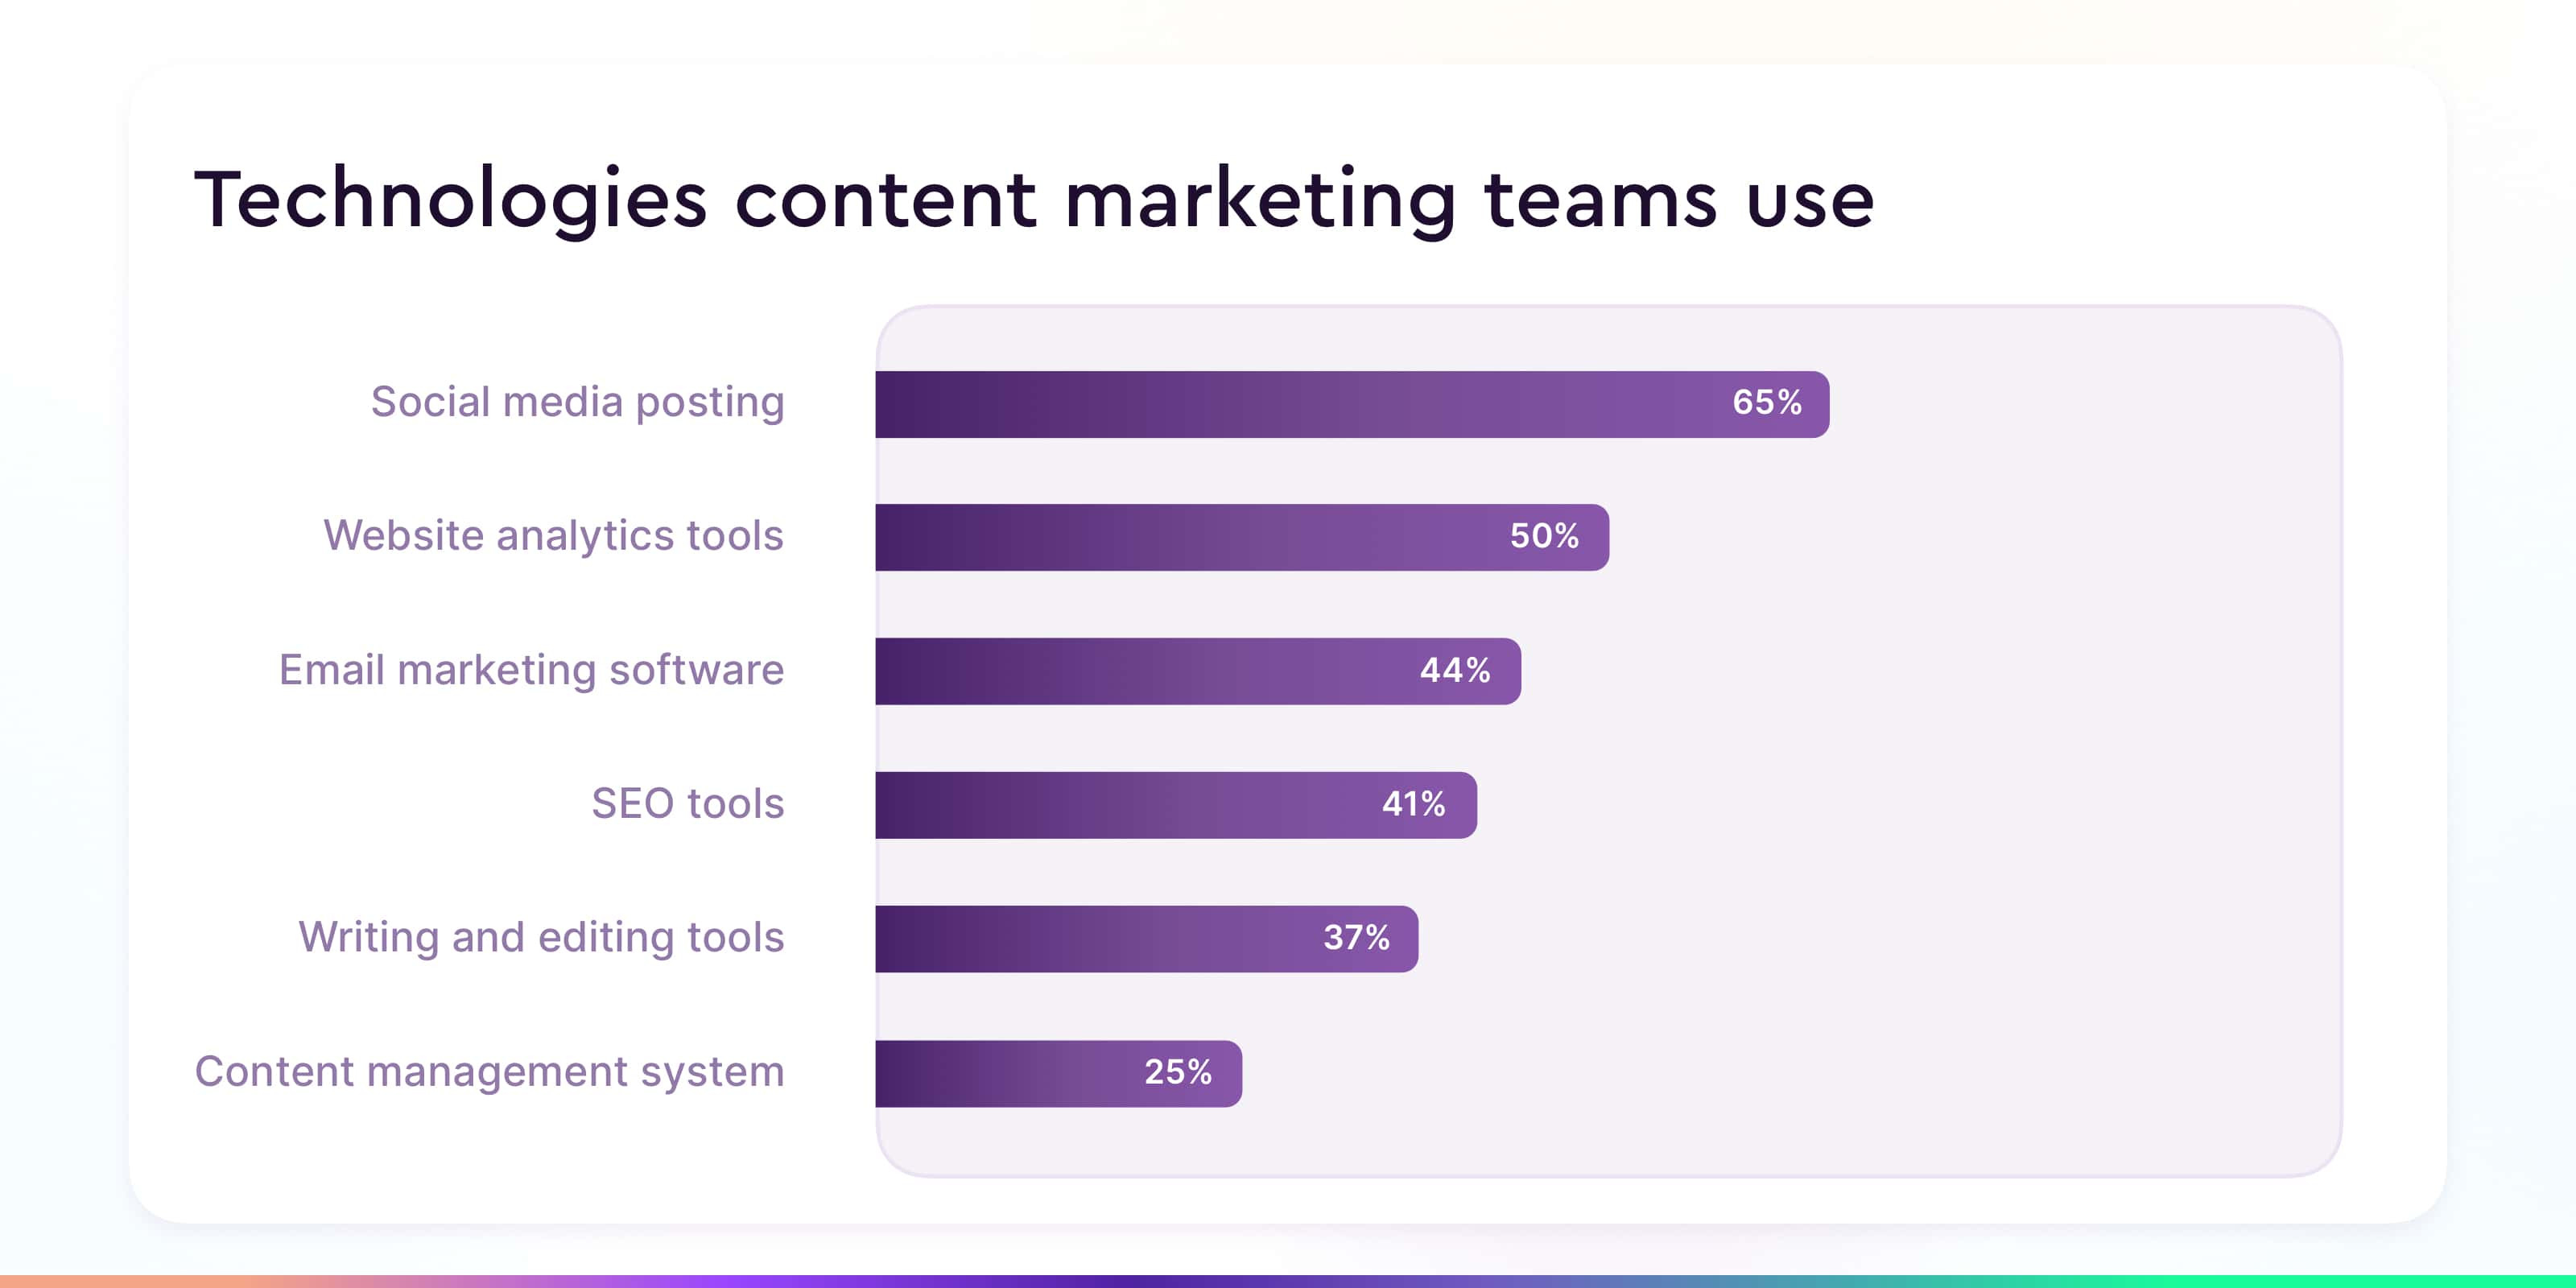 Technologies content marketing teams use to improve content engagement